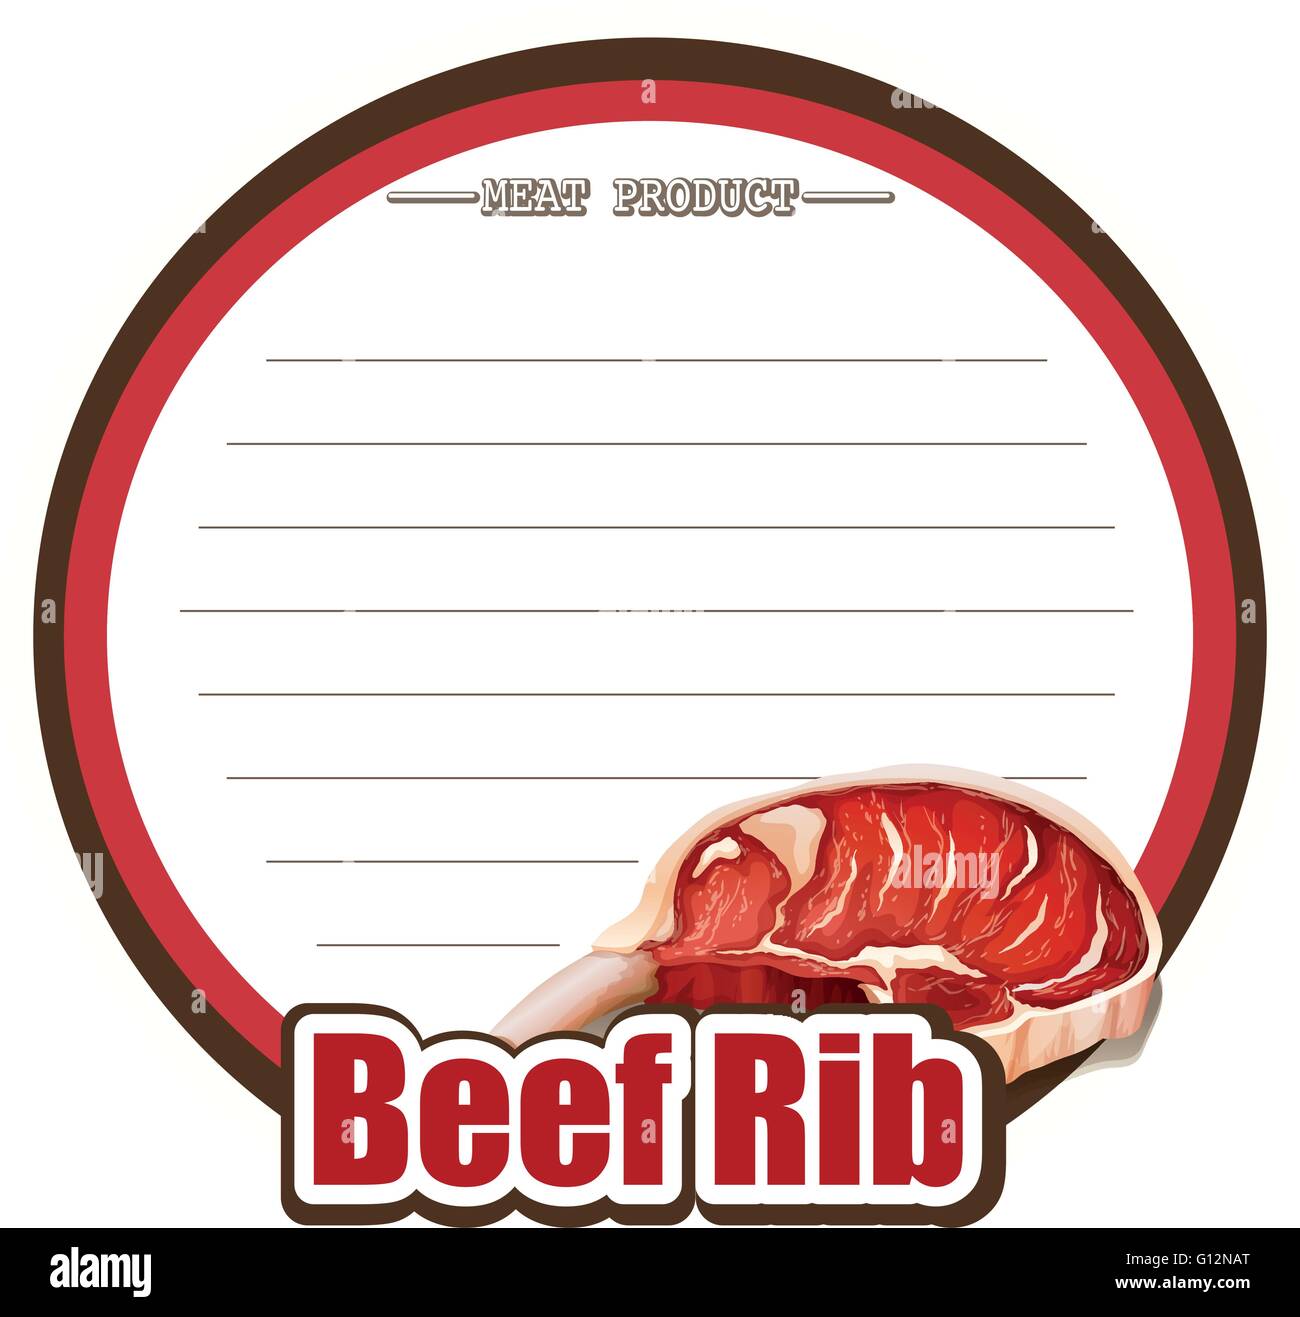 Line paper design with beef rib illustration Stock Vector